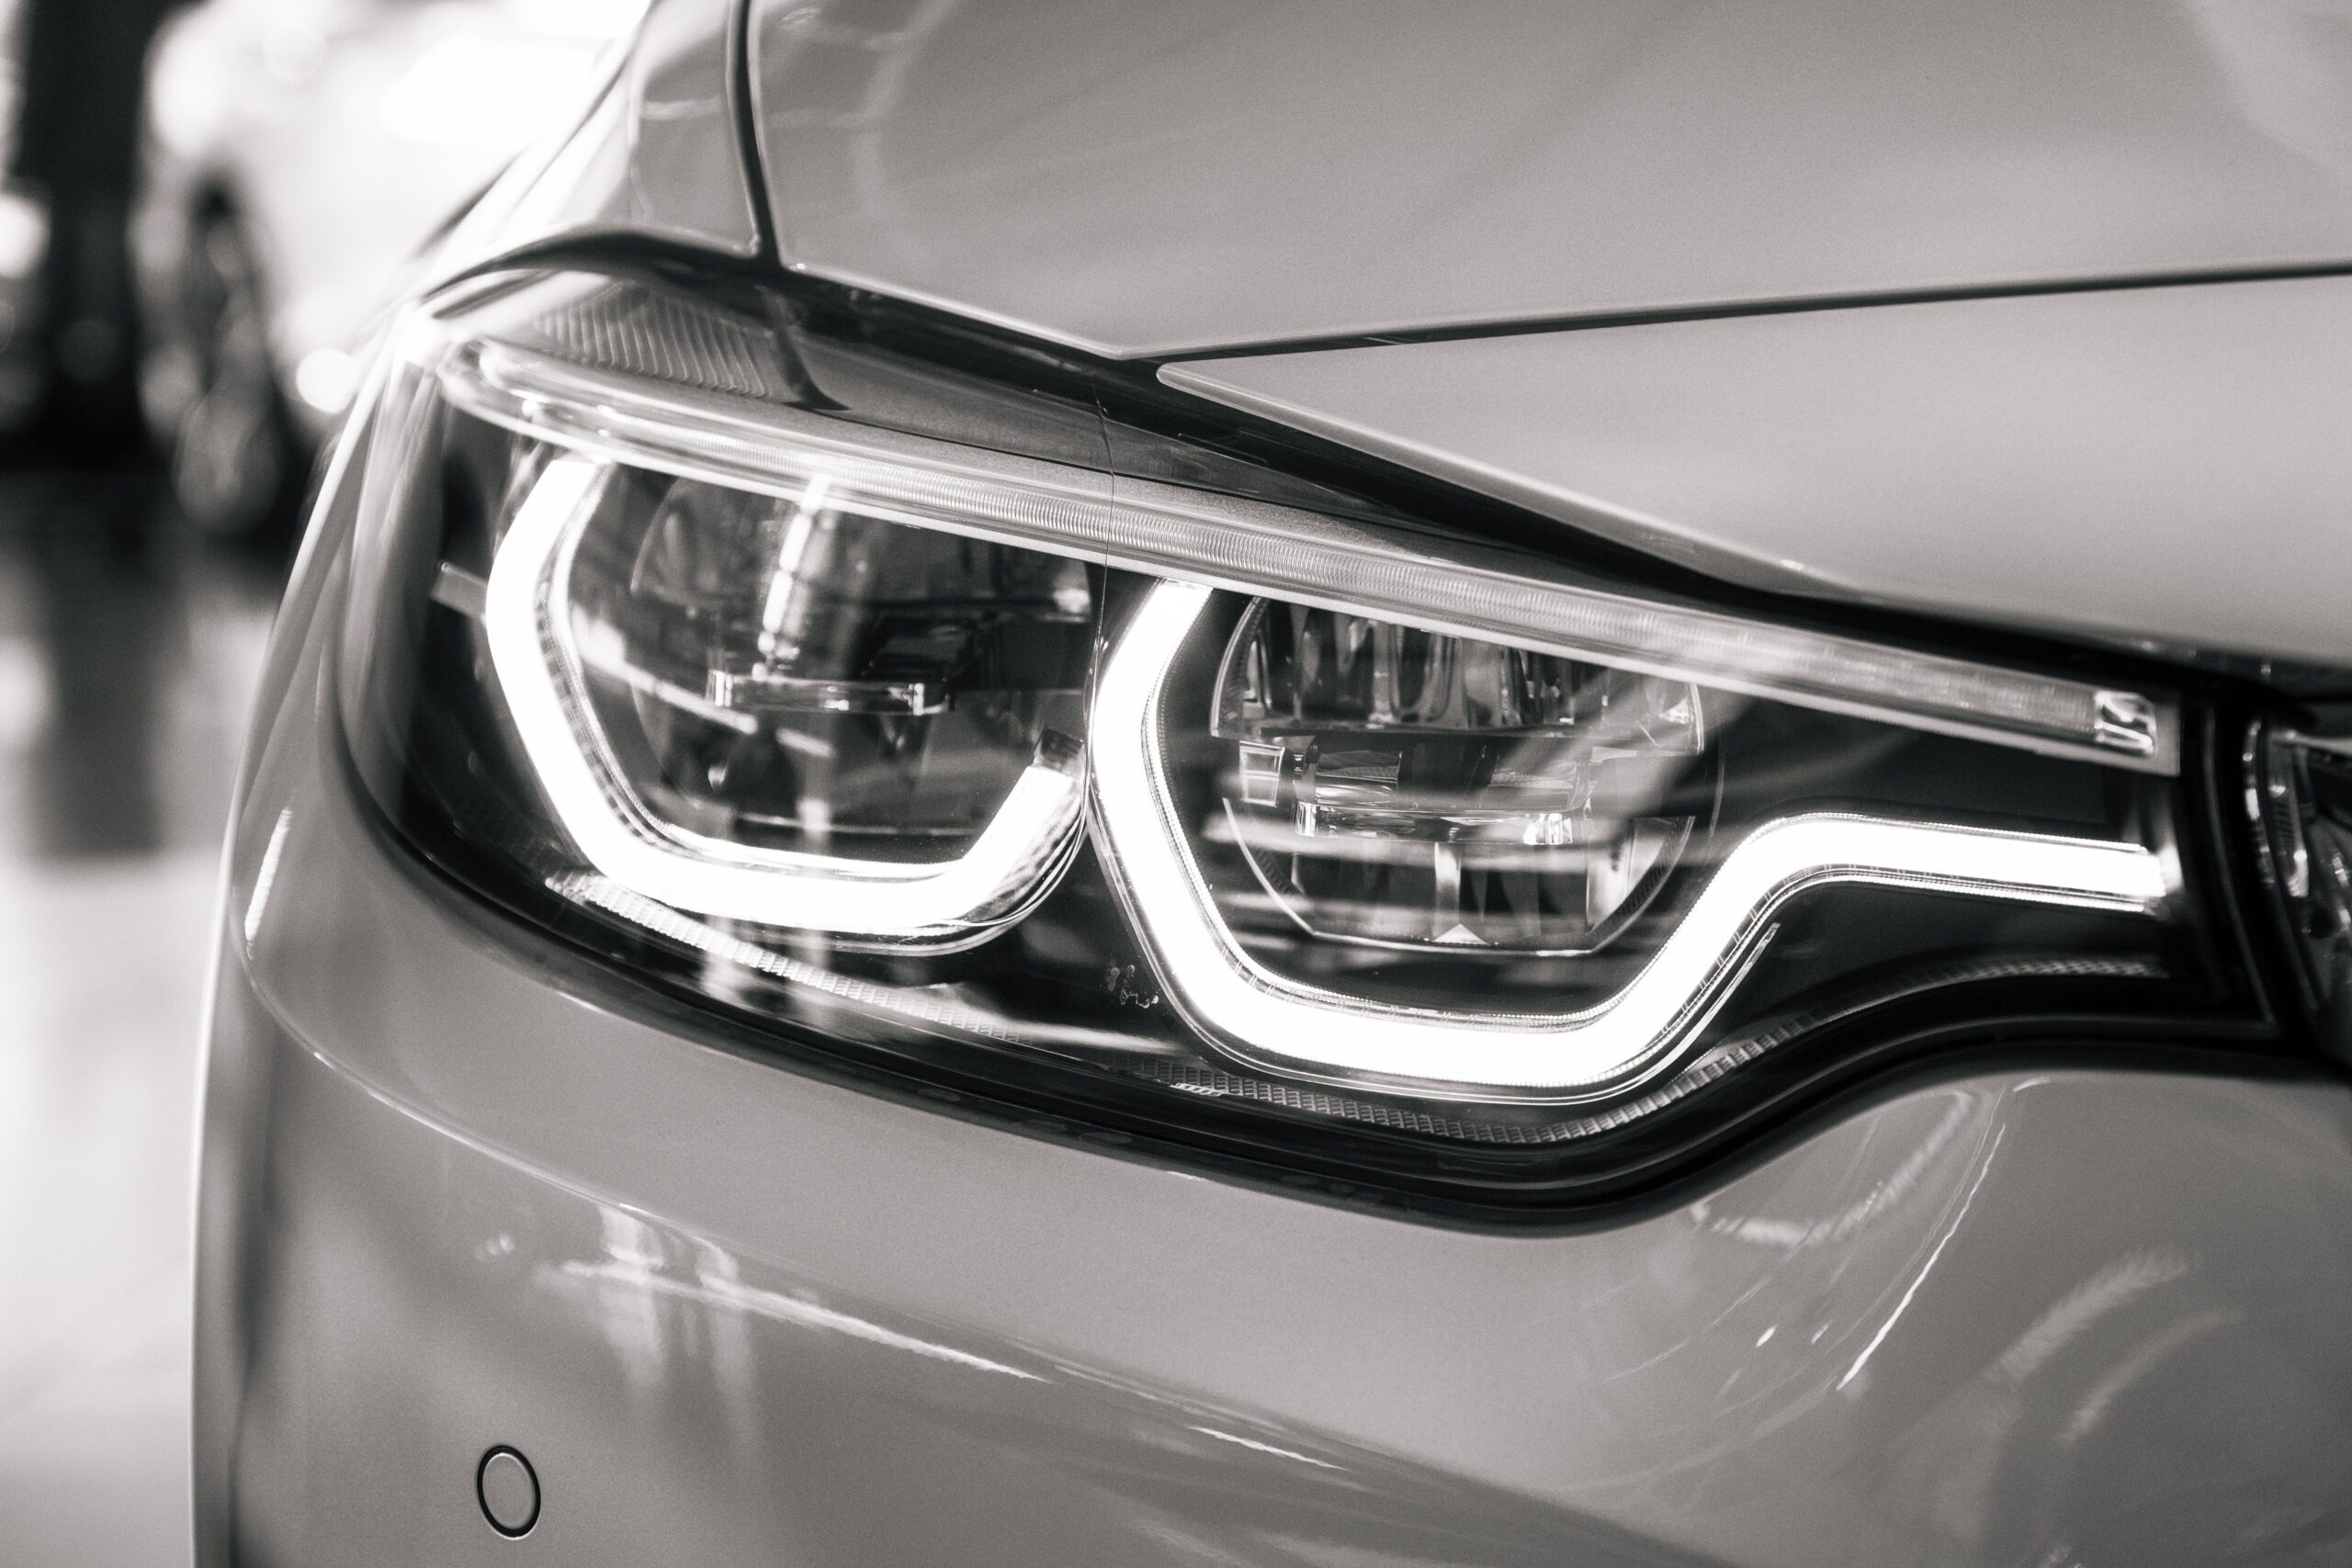 A lawsuit alleging BMW falsely stated 2021 430i and 430i xDrive cars had cornering lights on LED headlights has settled.